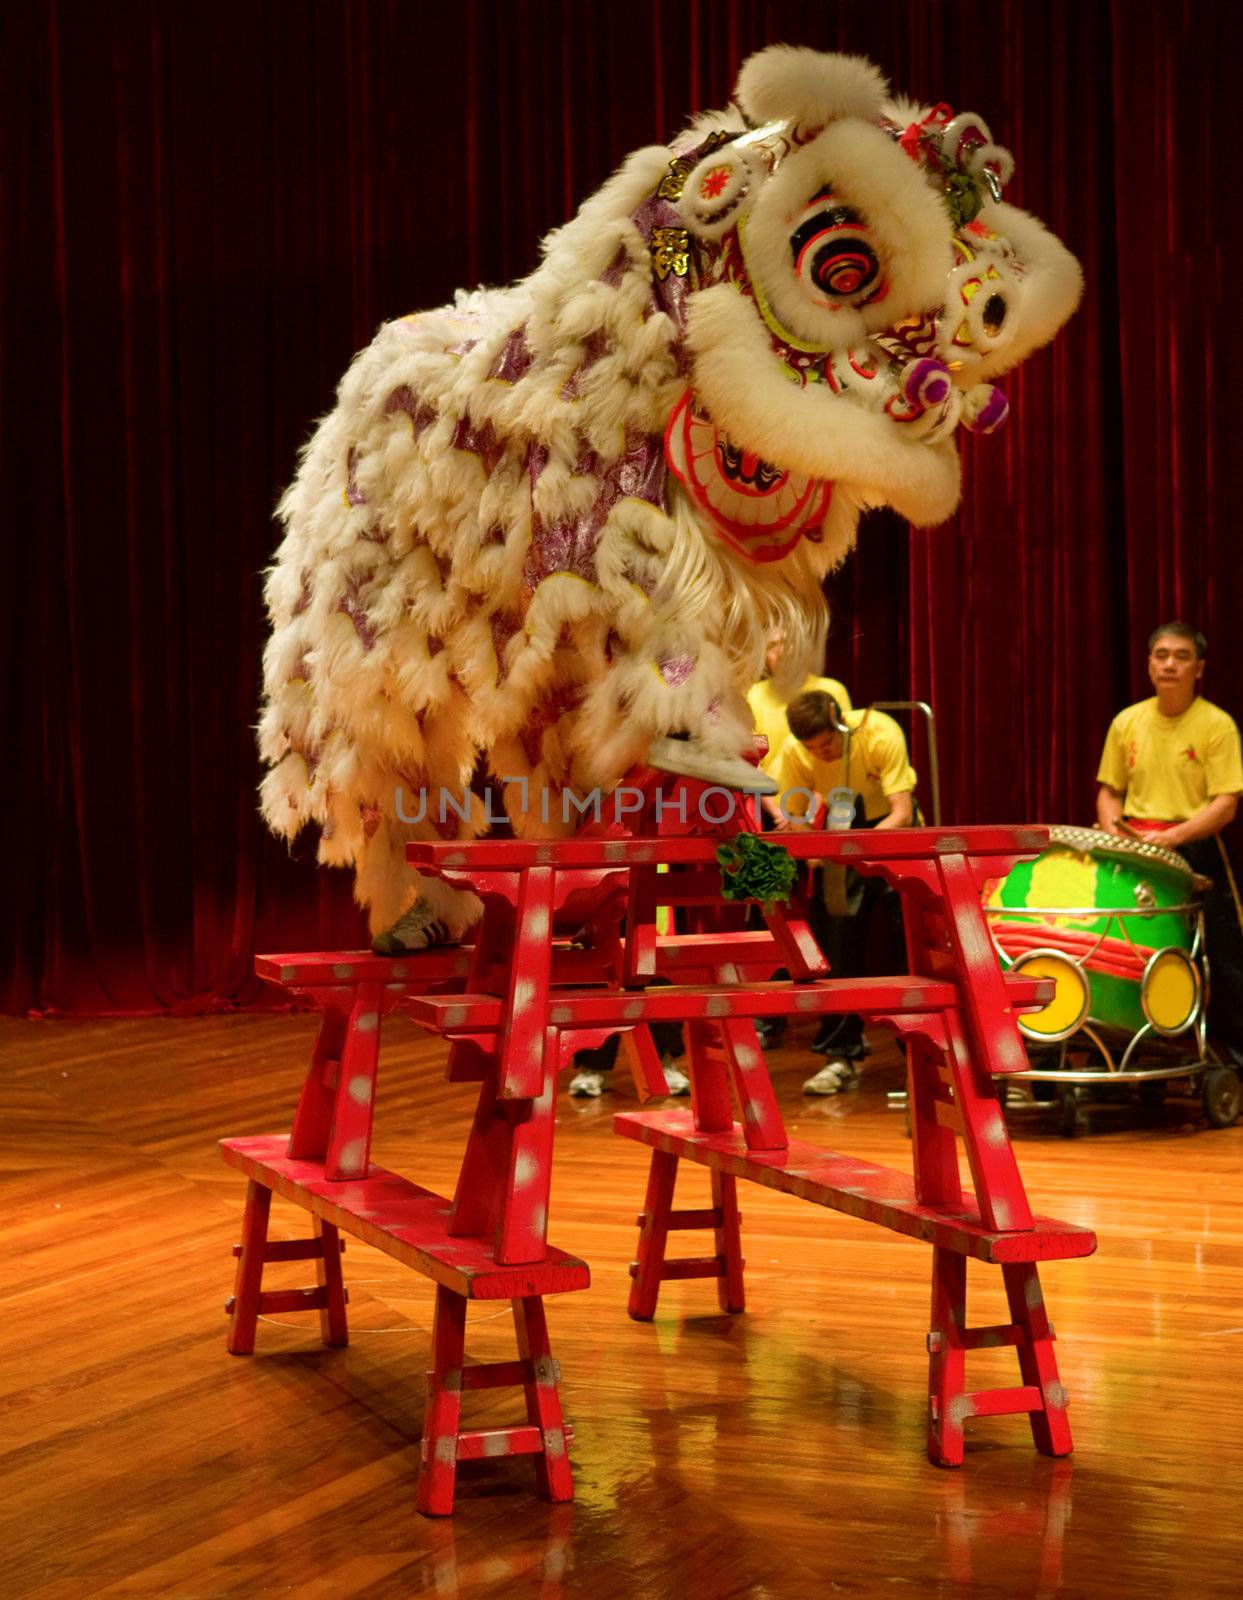 MACAU - APRIL 25: The traditional Chinese lion dance on stage, April 25, 2009, Macau